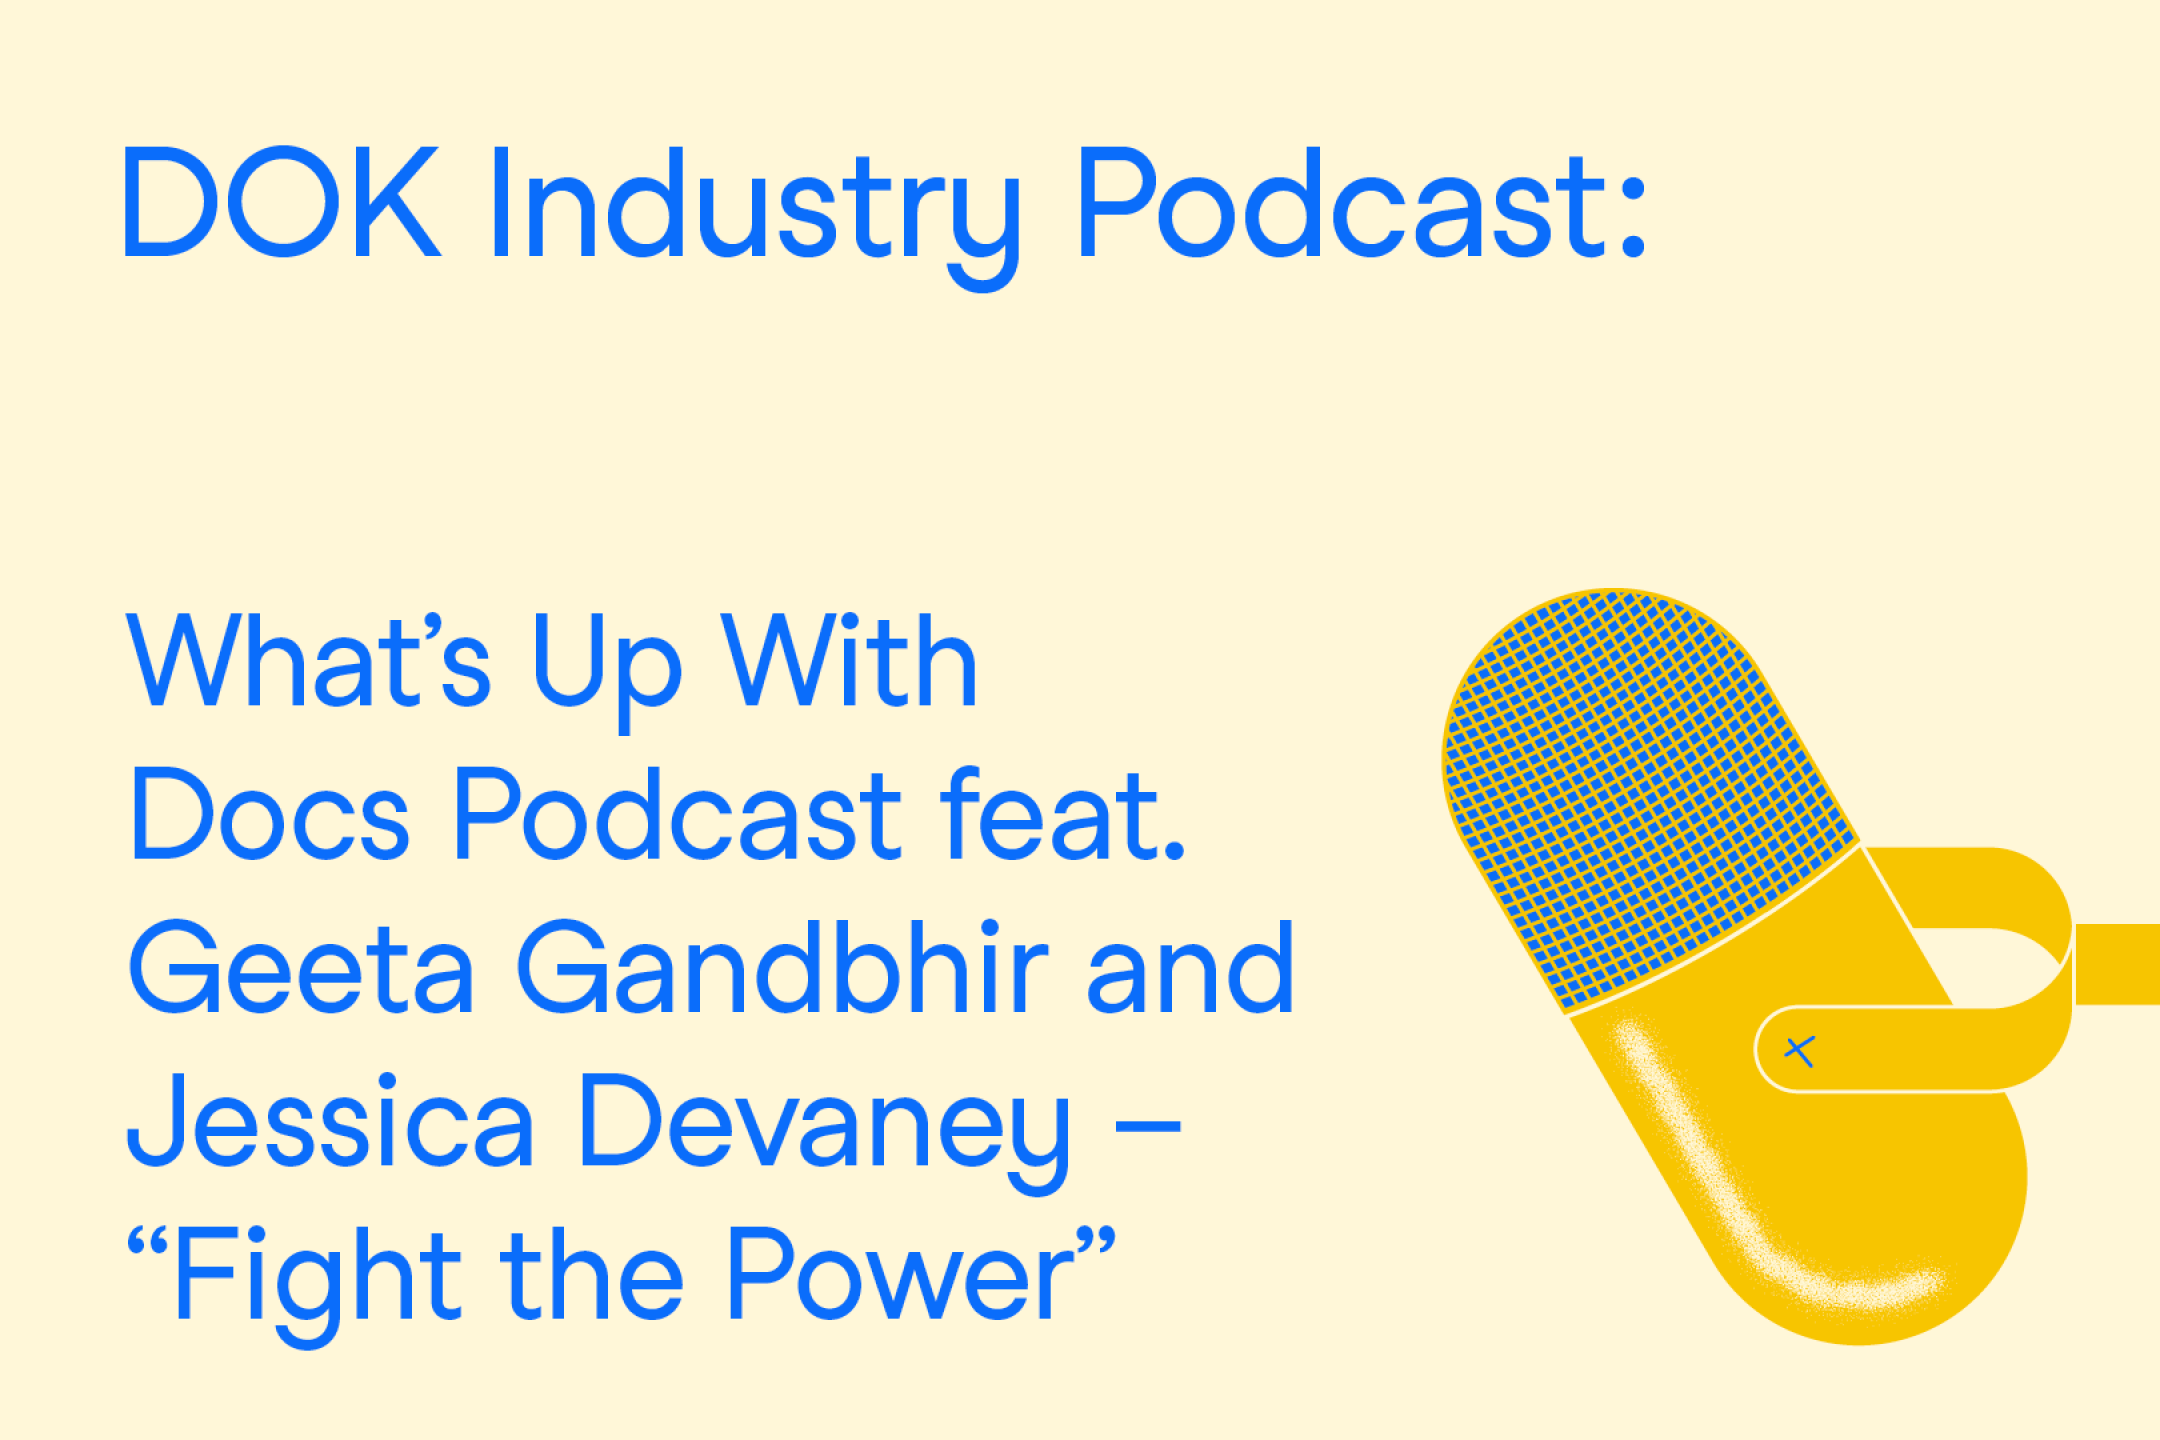 A text graphic with blue letters on a yellow background. At the right the illustration of a microphone. At the left the text: “DOK Industry Podcast: What’s Up With Docs Podcast feat. Geeta Gandbhir and Jessica Devaney – “Fight the Power””